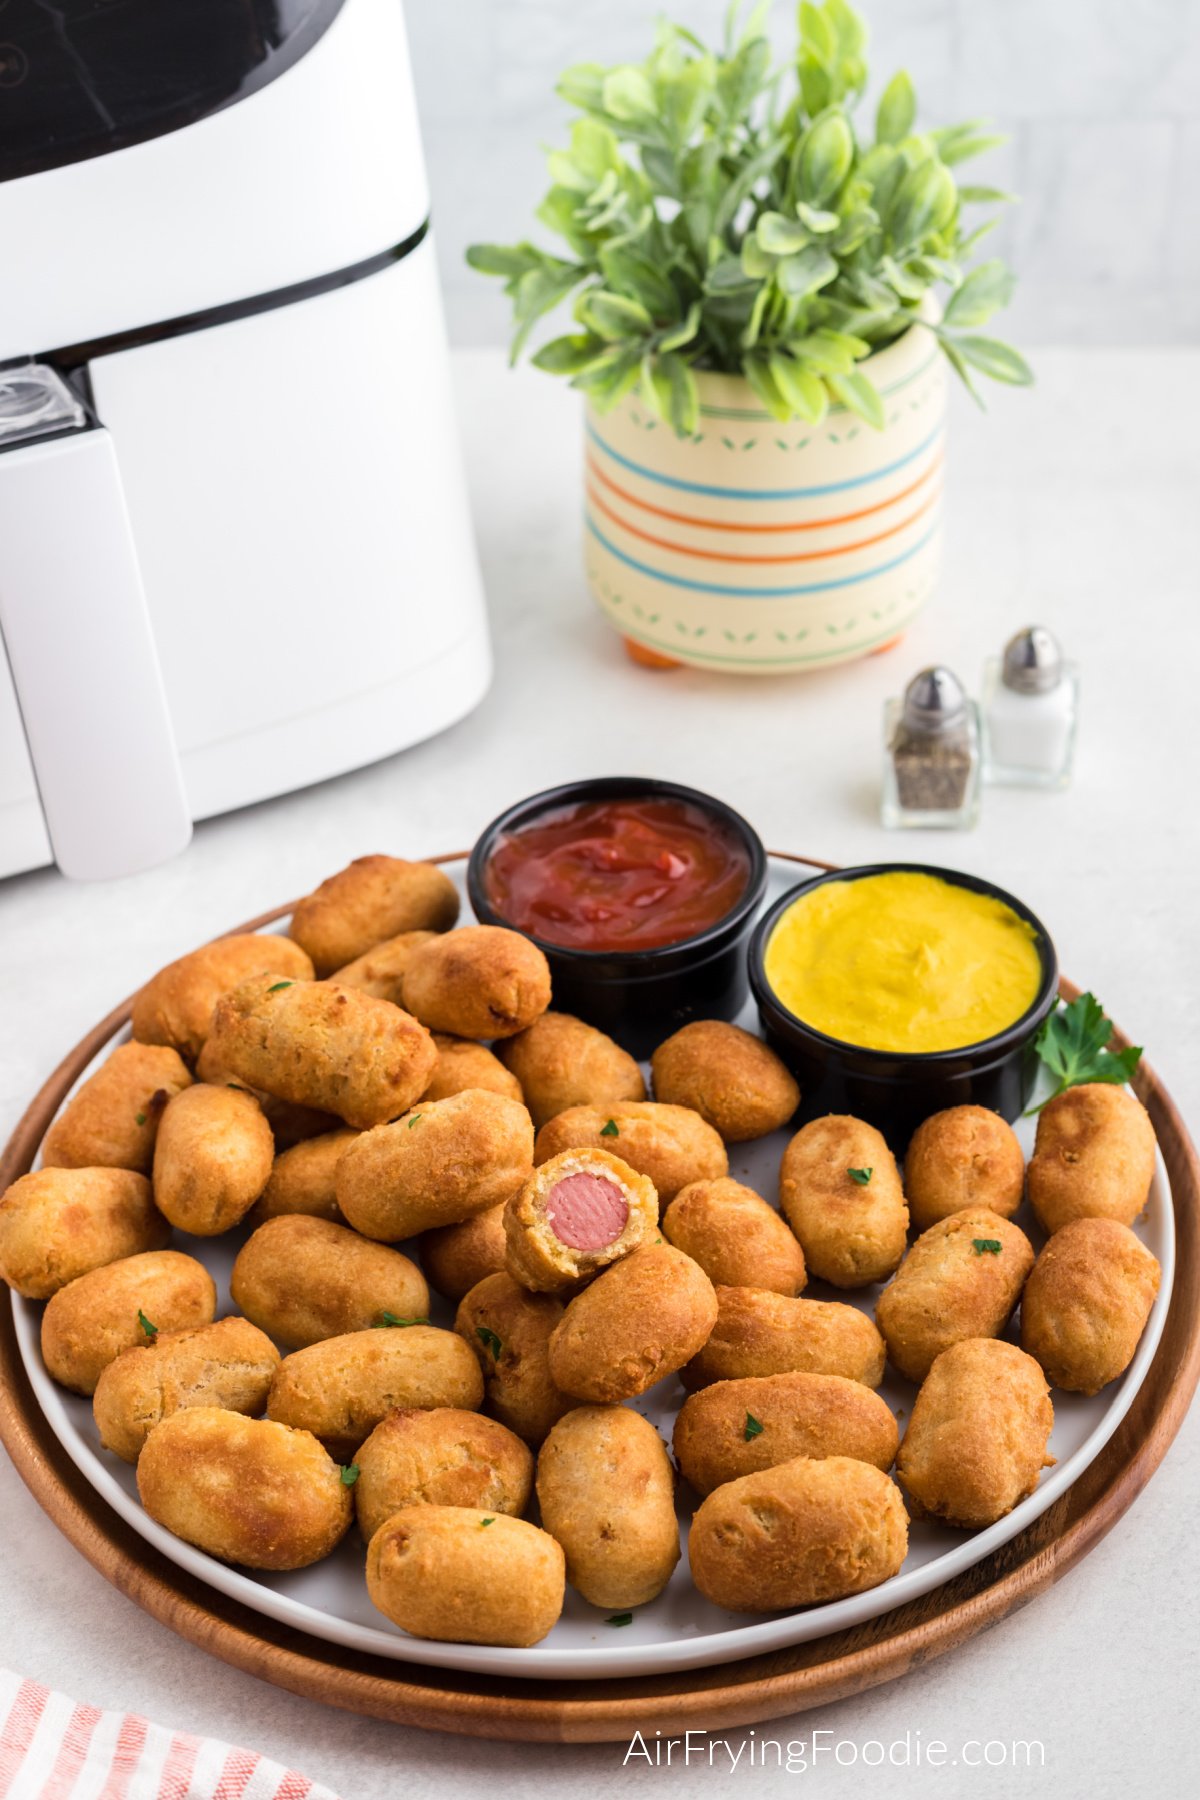 Mini corn dogs in a round plate, made in the air fryer, served with a side of ketchup and mustard.